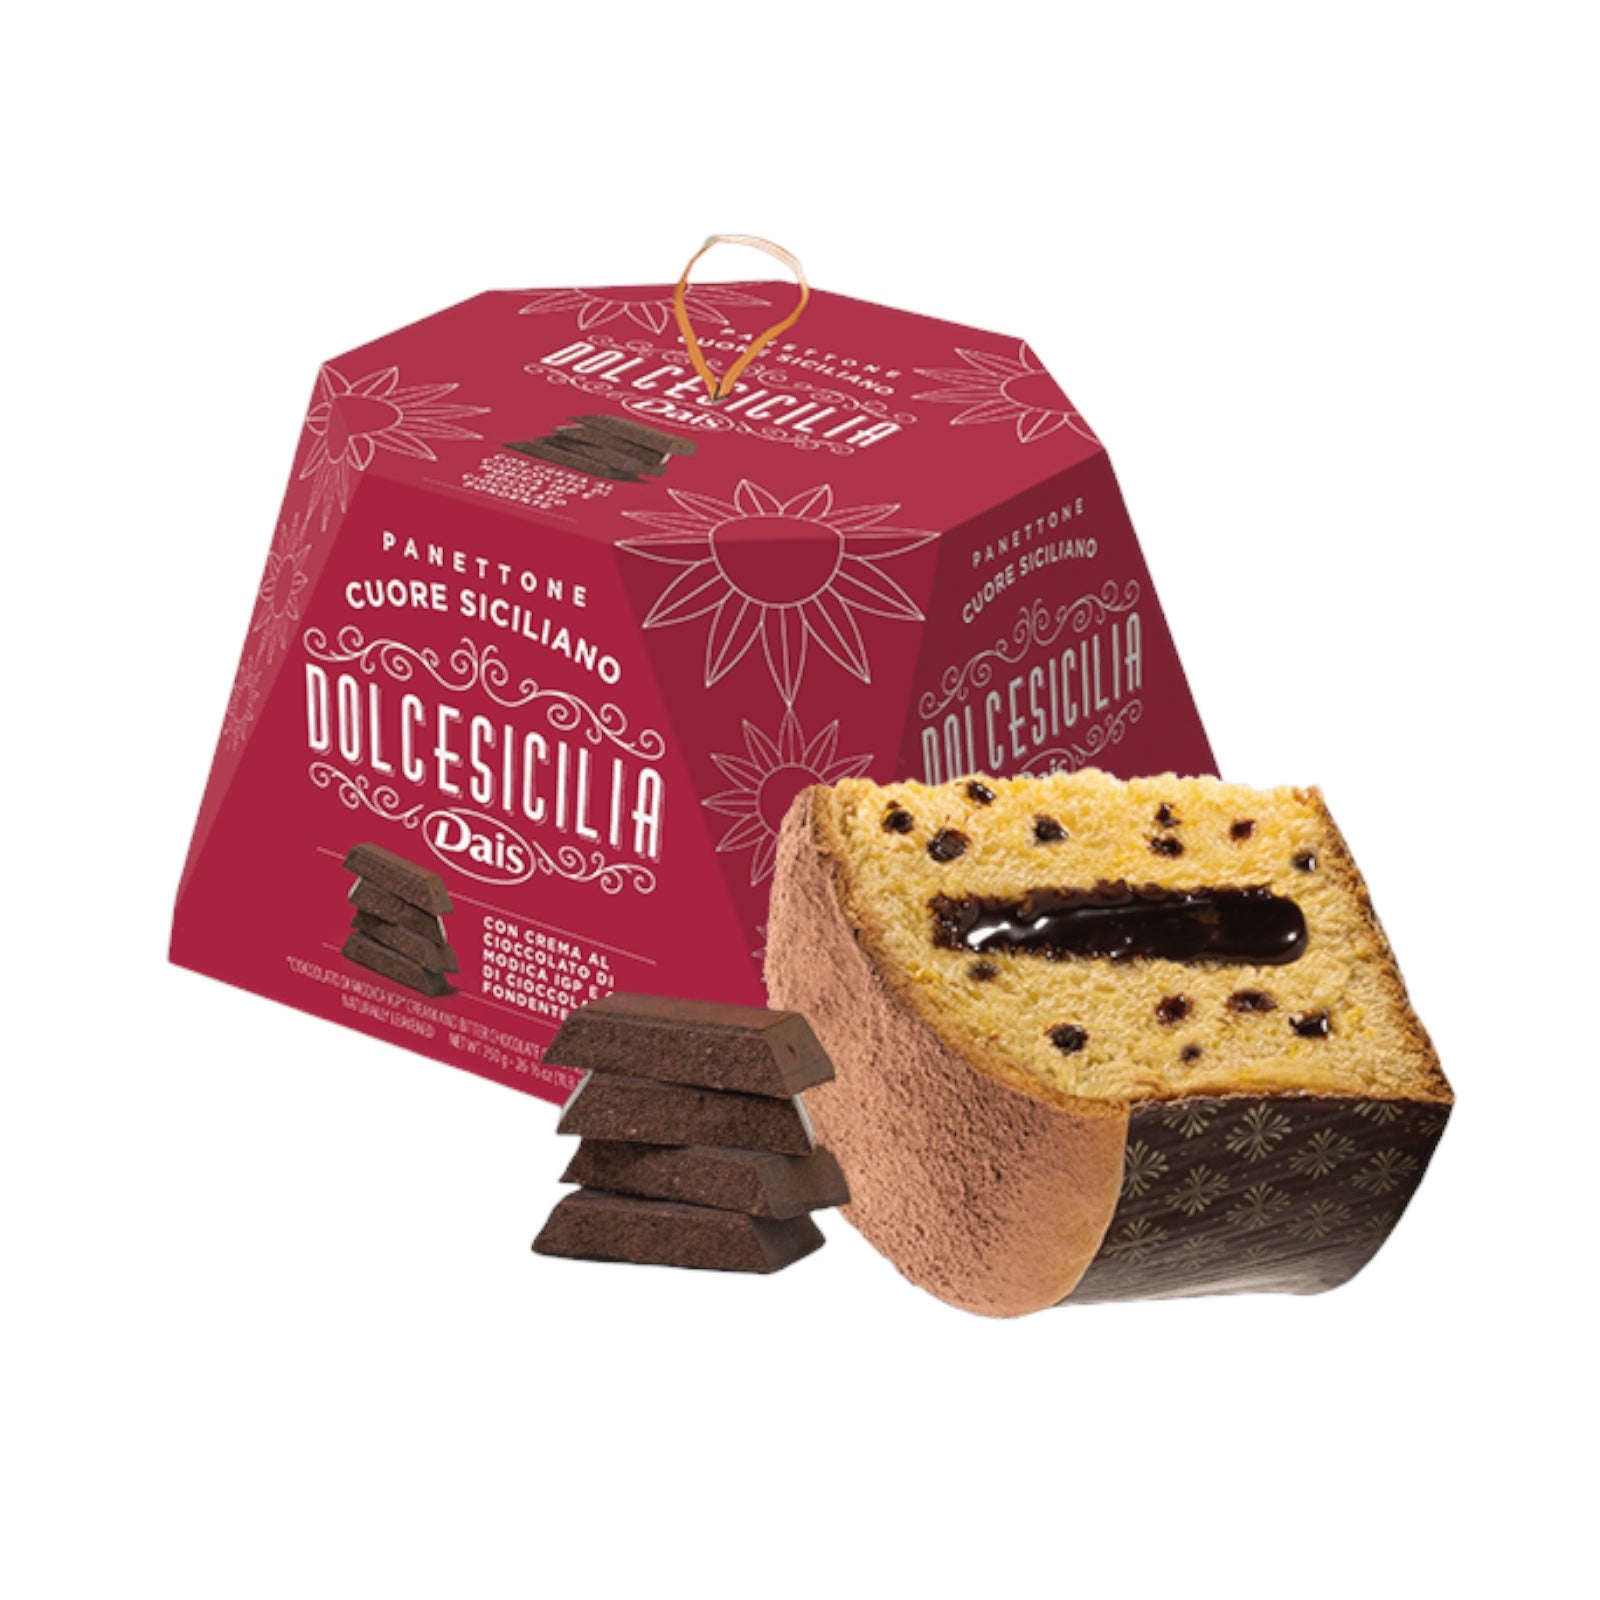 Panettone With Chocolate Cream & Chocolate Chips By Dais 750g